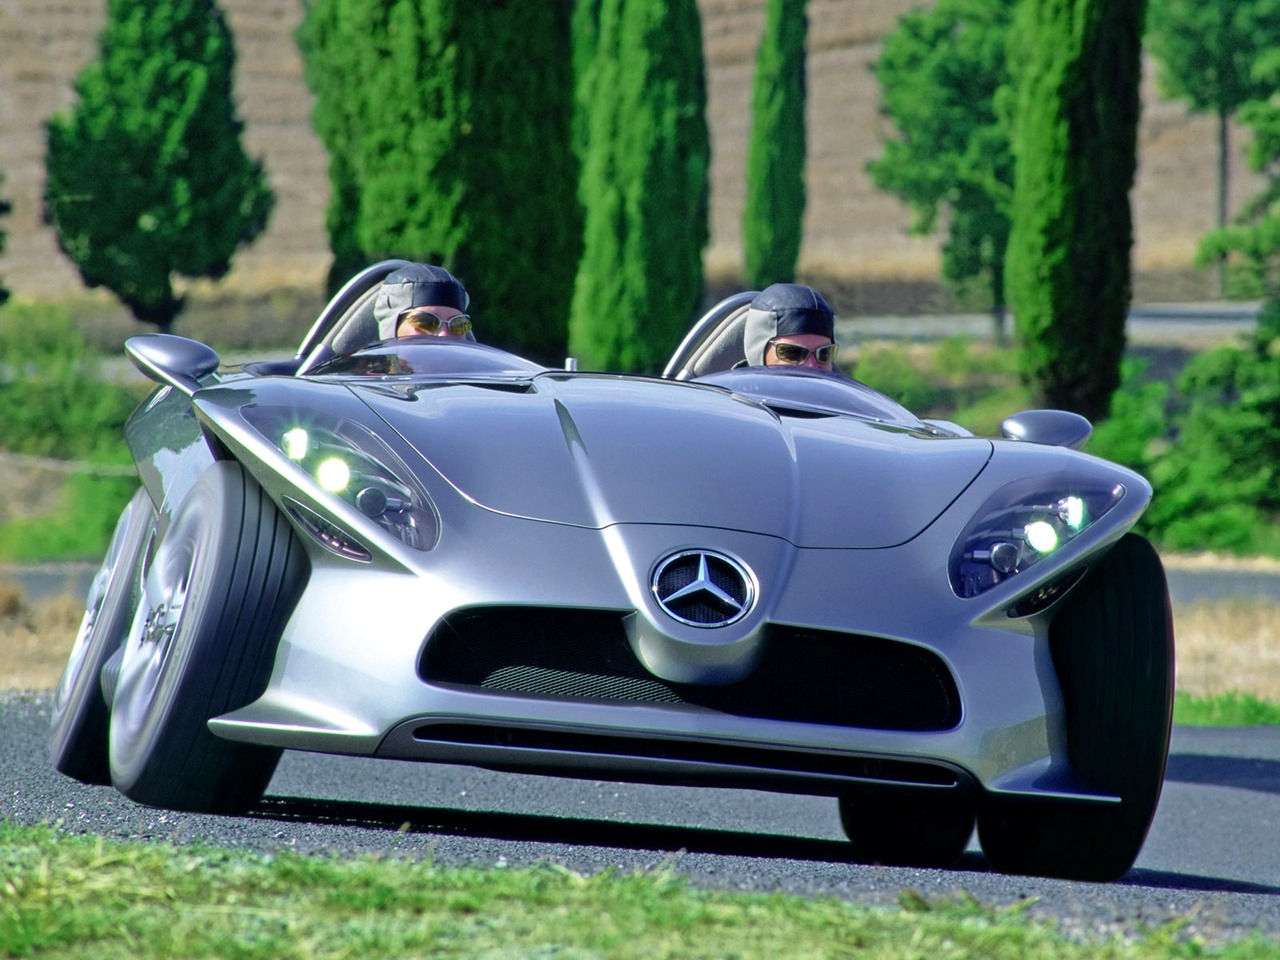 Mercedes-Benz F400 "Carving" Concept (2001) - Old Concept Cars